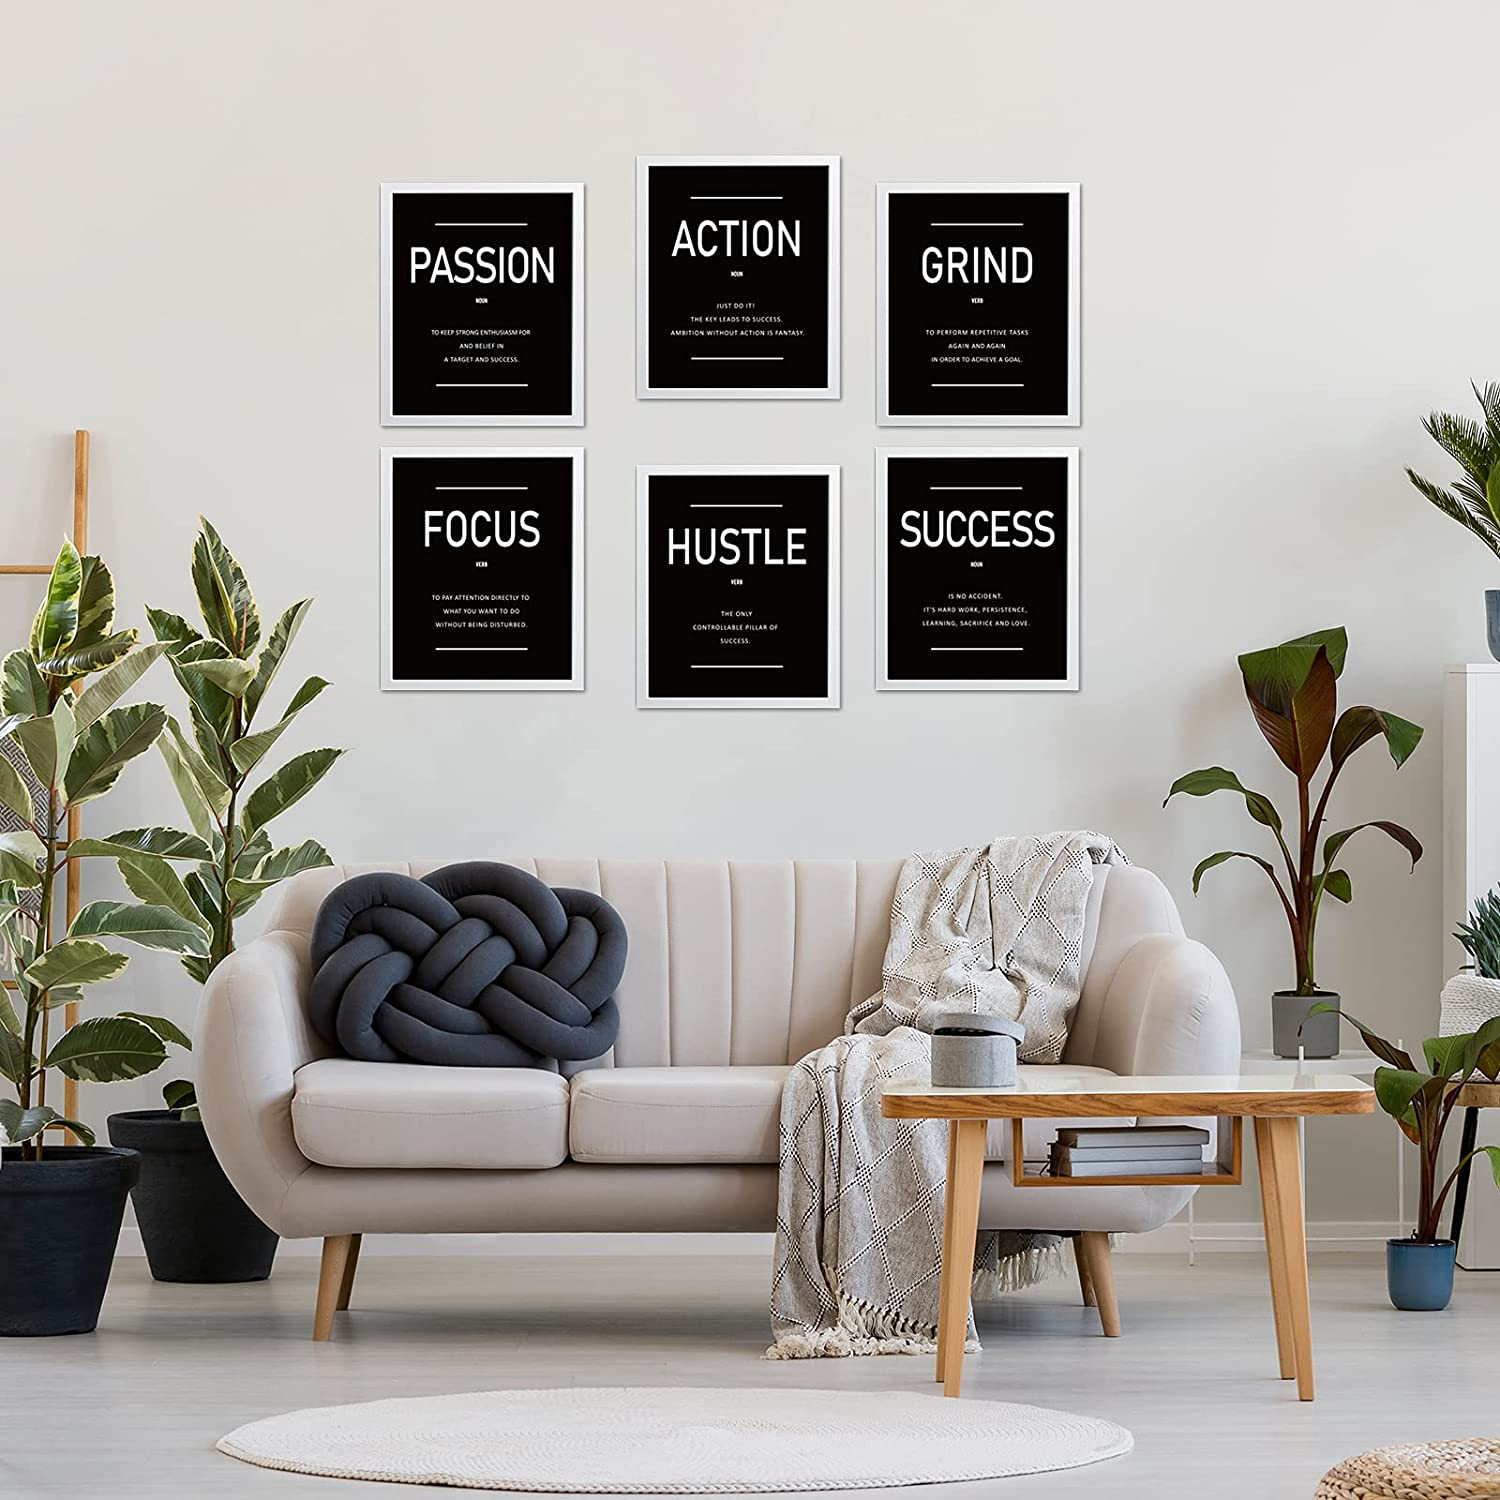 Inspirational Wall Decor for Living Room Office - Motivational Wall Art for Bedroom - Positive Quotes & Sayings Posters - Daily Affirmation for Men Women Teen kids - Black and White Wall Art (Set of 6, 8X10IN, Unframed)